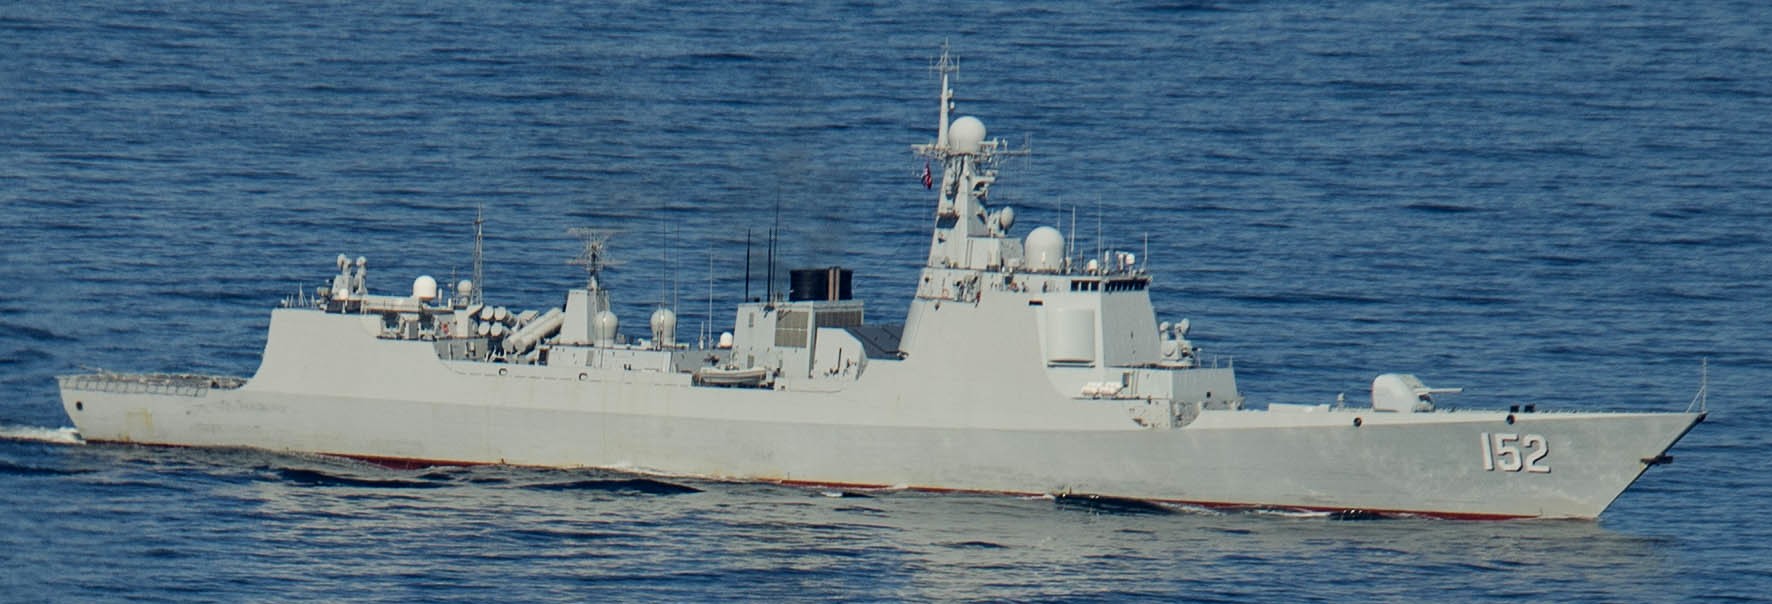 ddg-152 plans jinan type 052c class guided missile destroyer china people's liberation army navy 05